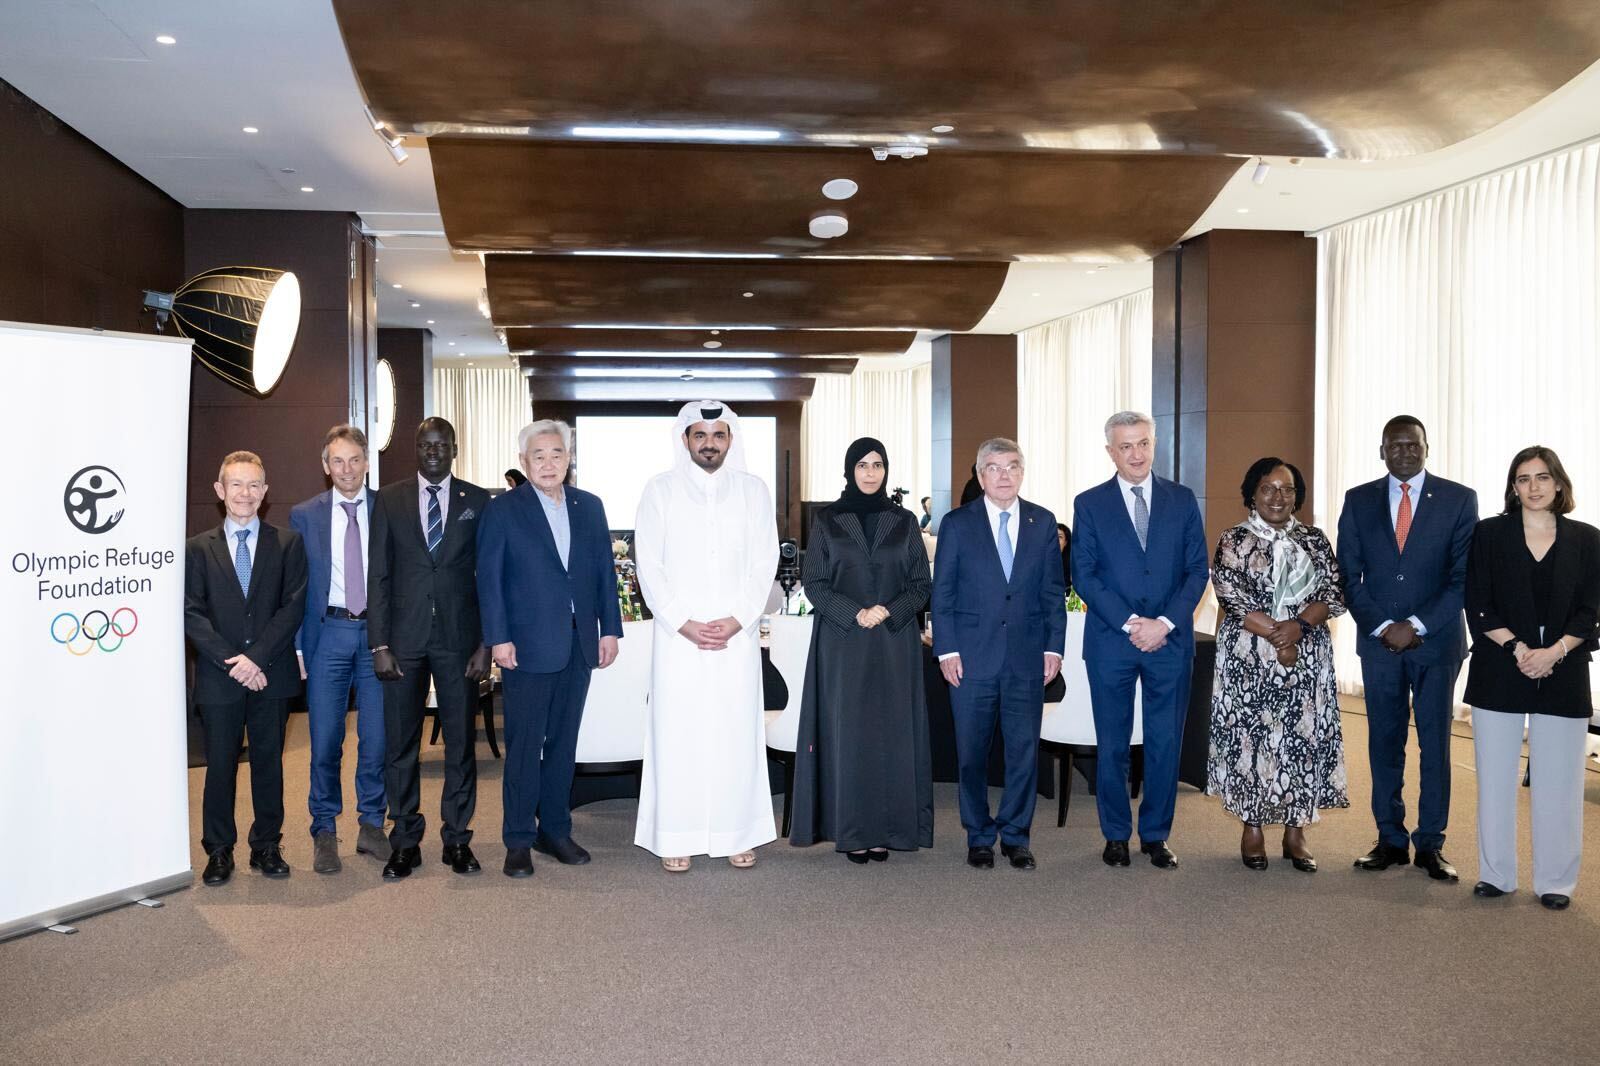 Sheikh Joaan hosts Olympic Refuge Foundation for Annual Board meeting